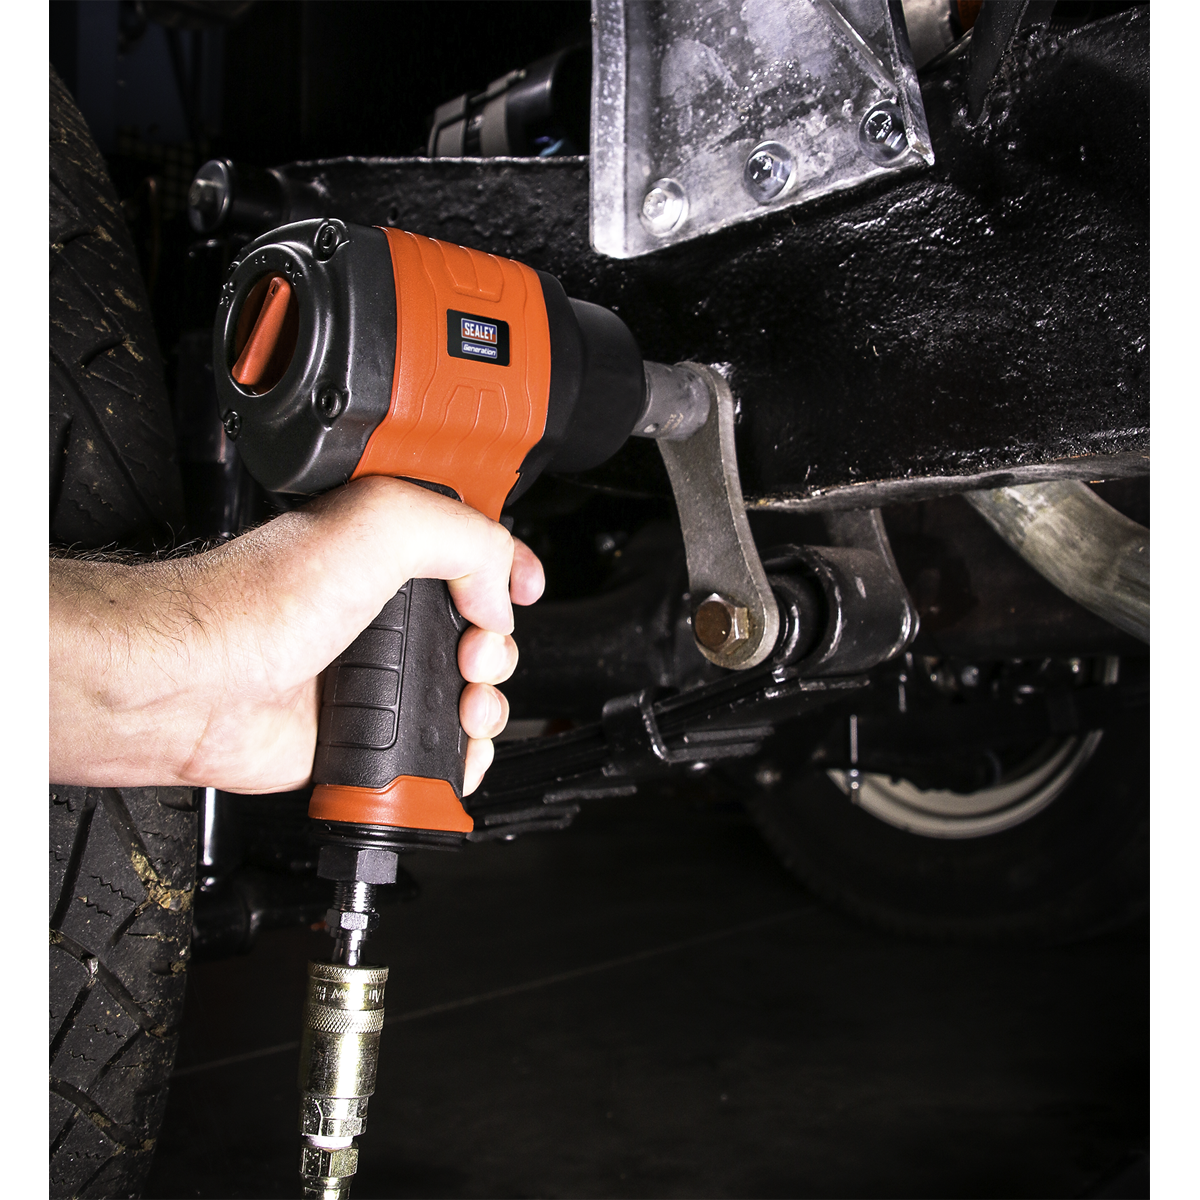 Composite Air Impact Wrench 1/2"Sq Drive - Twin Hammer